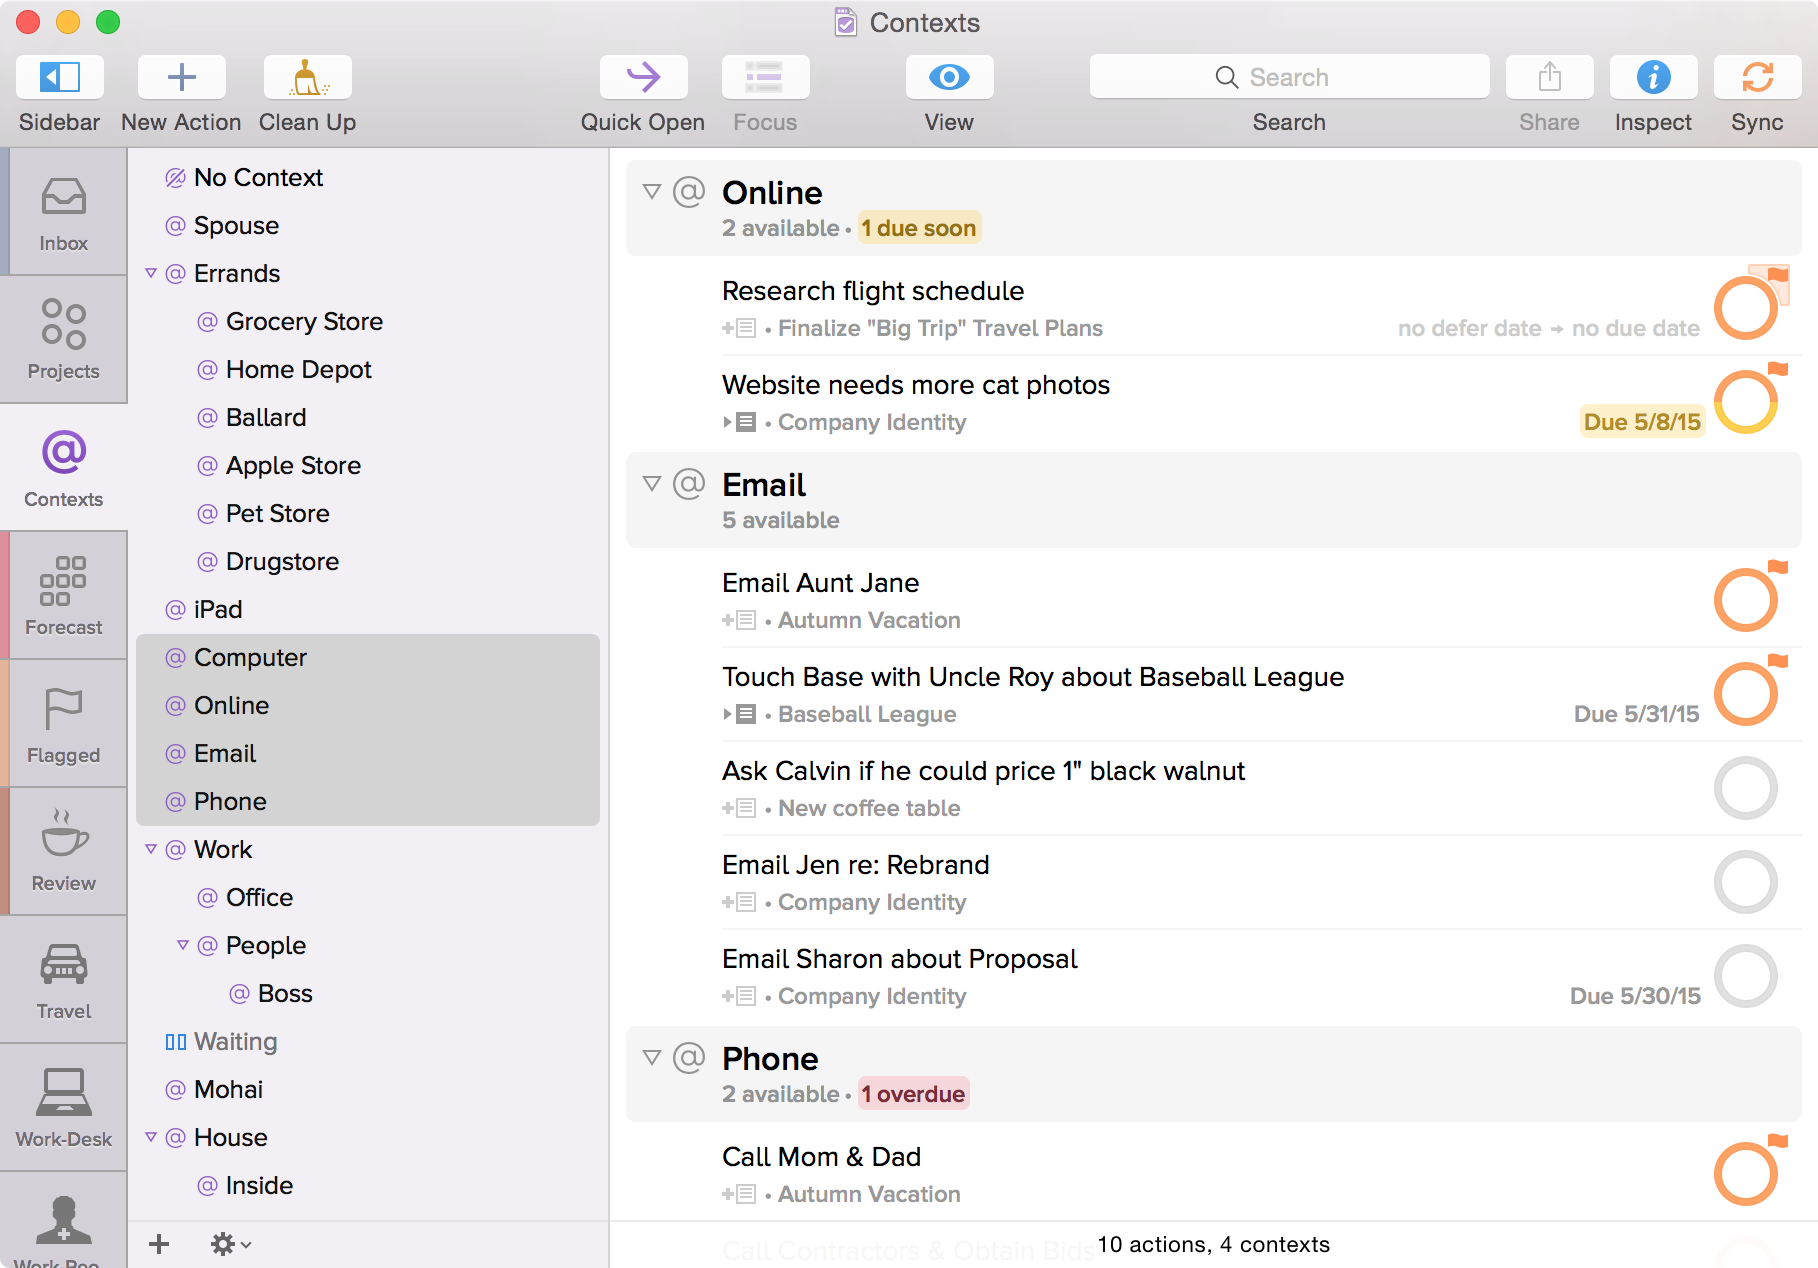 Screenshot of OmniFocus for Mac showing the Contexts perspective with Computer, Online, Email, and Phone selected